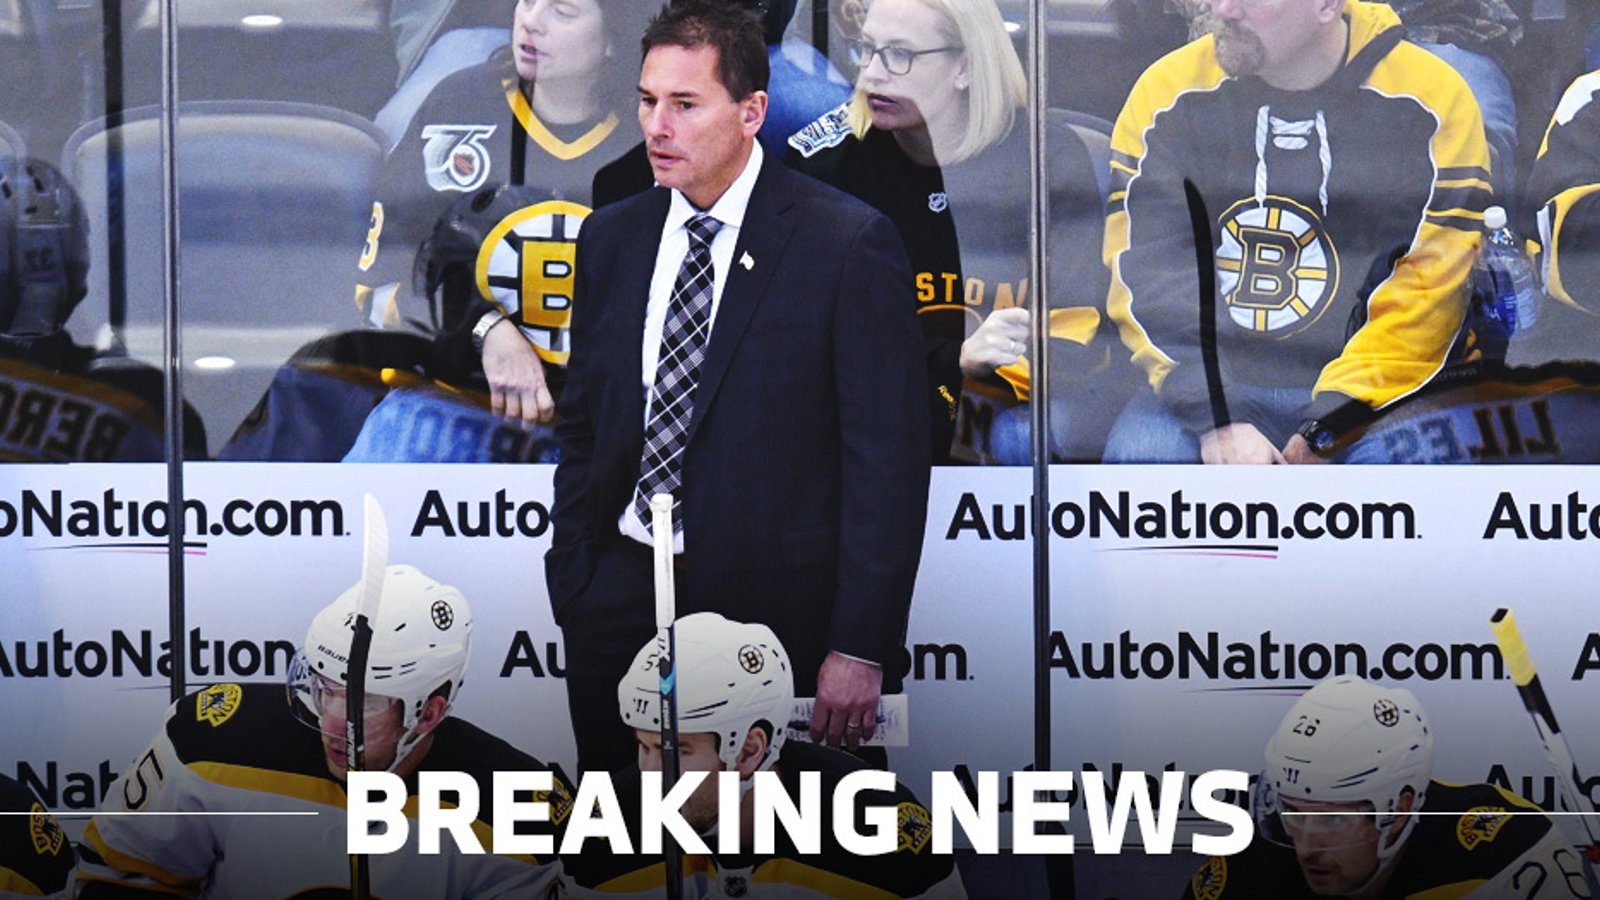 BREAKING: Newest Bruins Rookie given opportunity of a lifetime